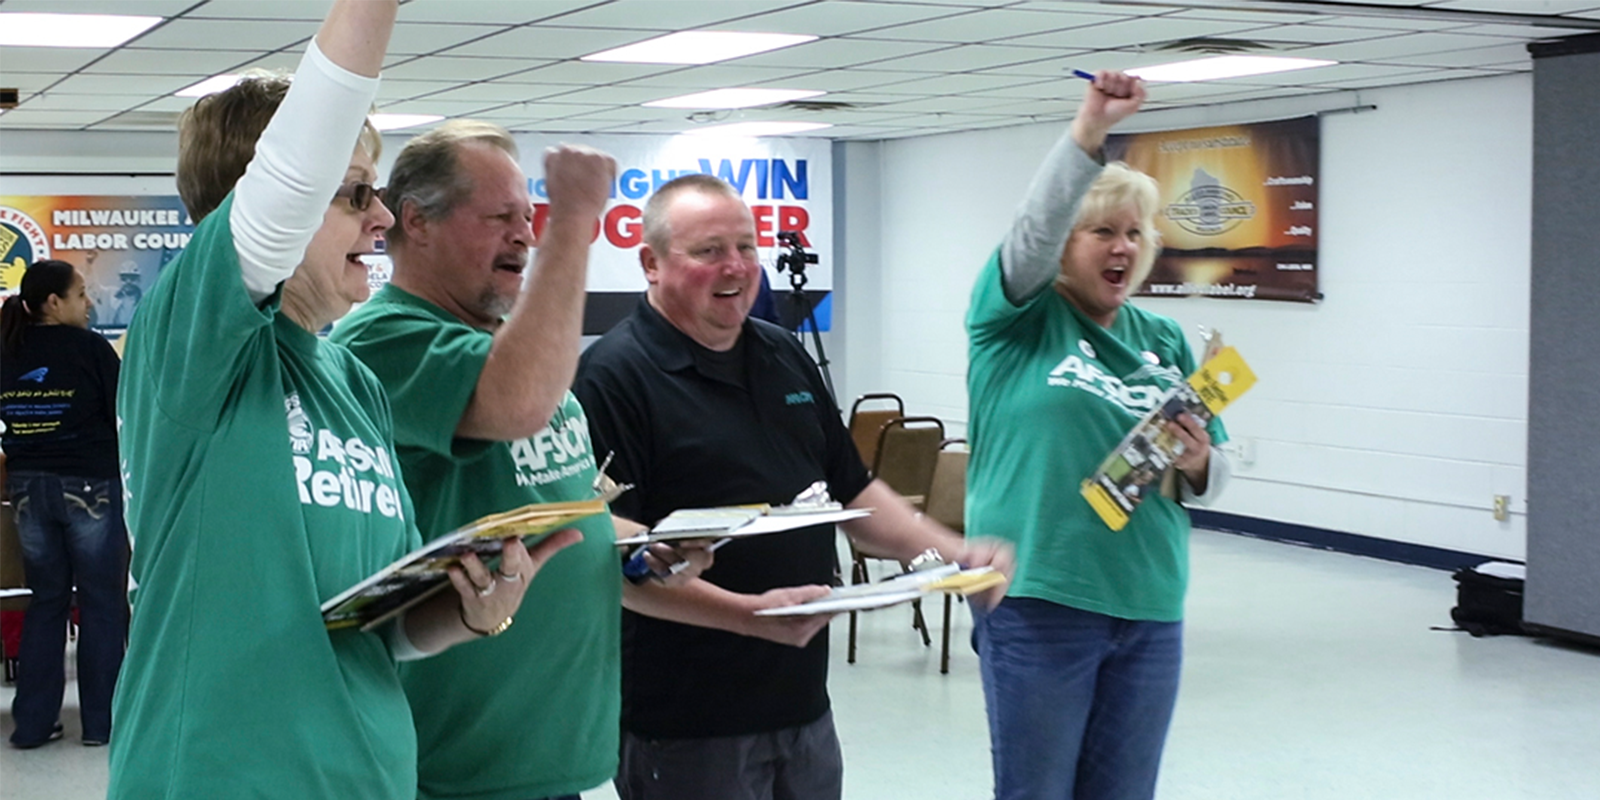 Photograph of two women and two men cheering - presumably for their winning candidate - and all of whom are wearing AFSCME shirts.